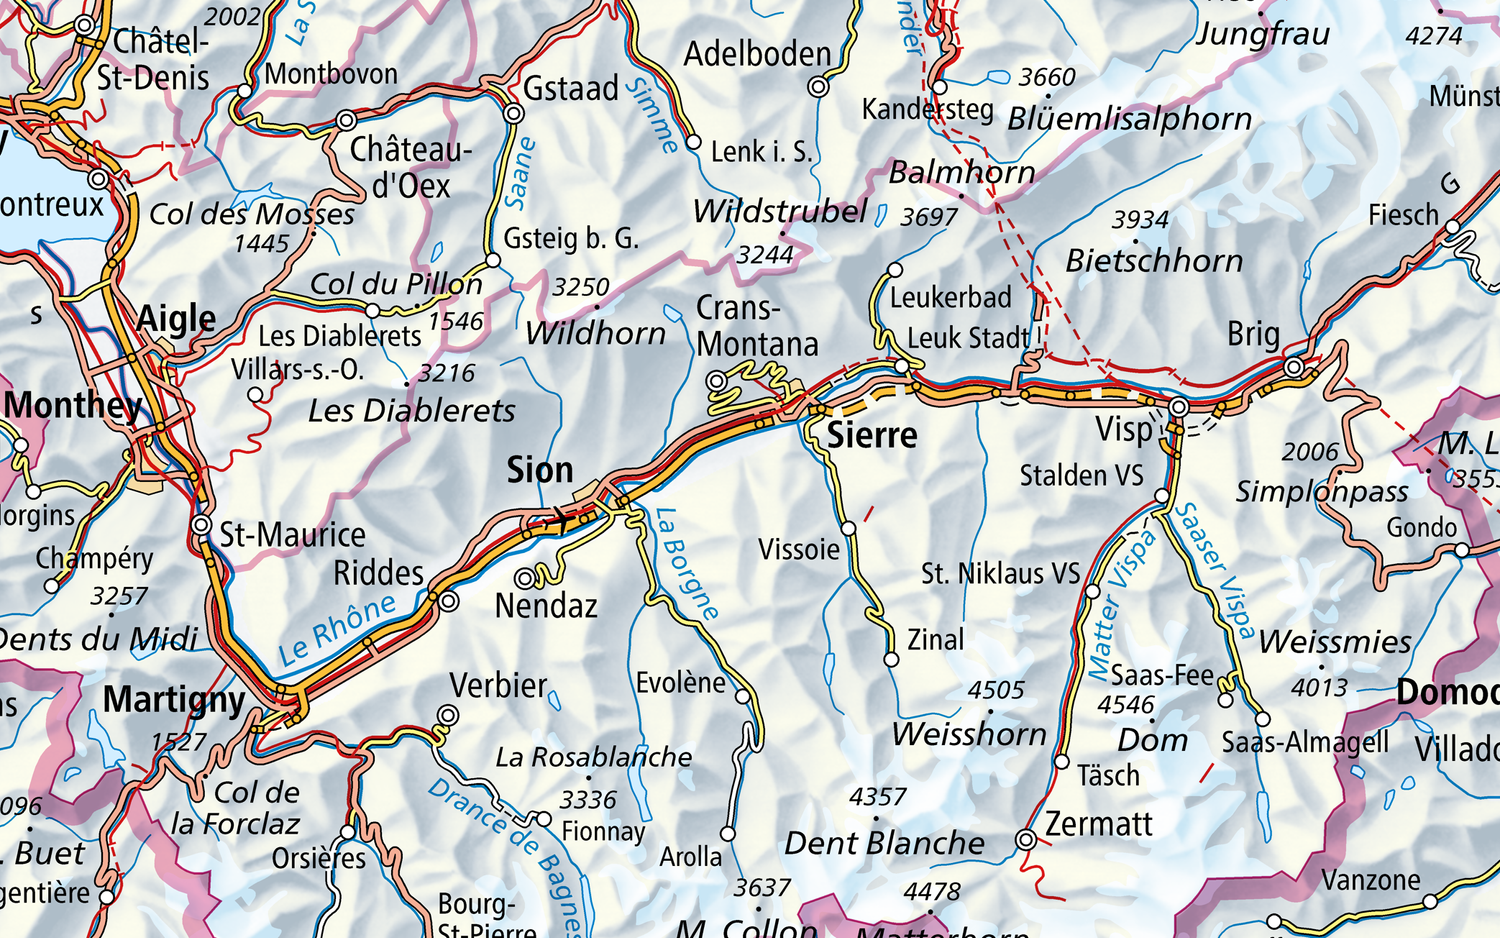 The image shows a section of the Swiss Map Raster 1000 of the Rhone Valley (VS) from Martigny to Fiesch. 